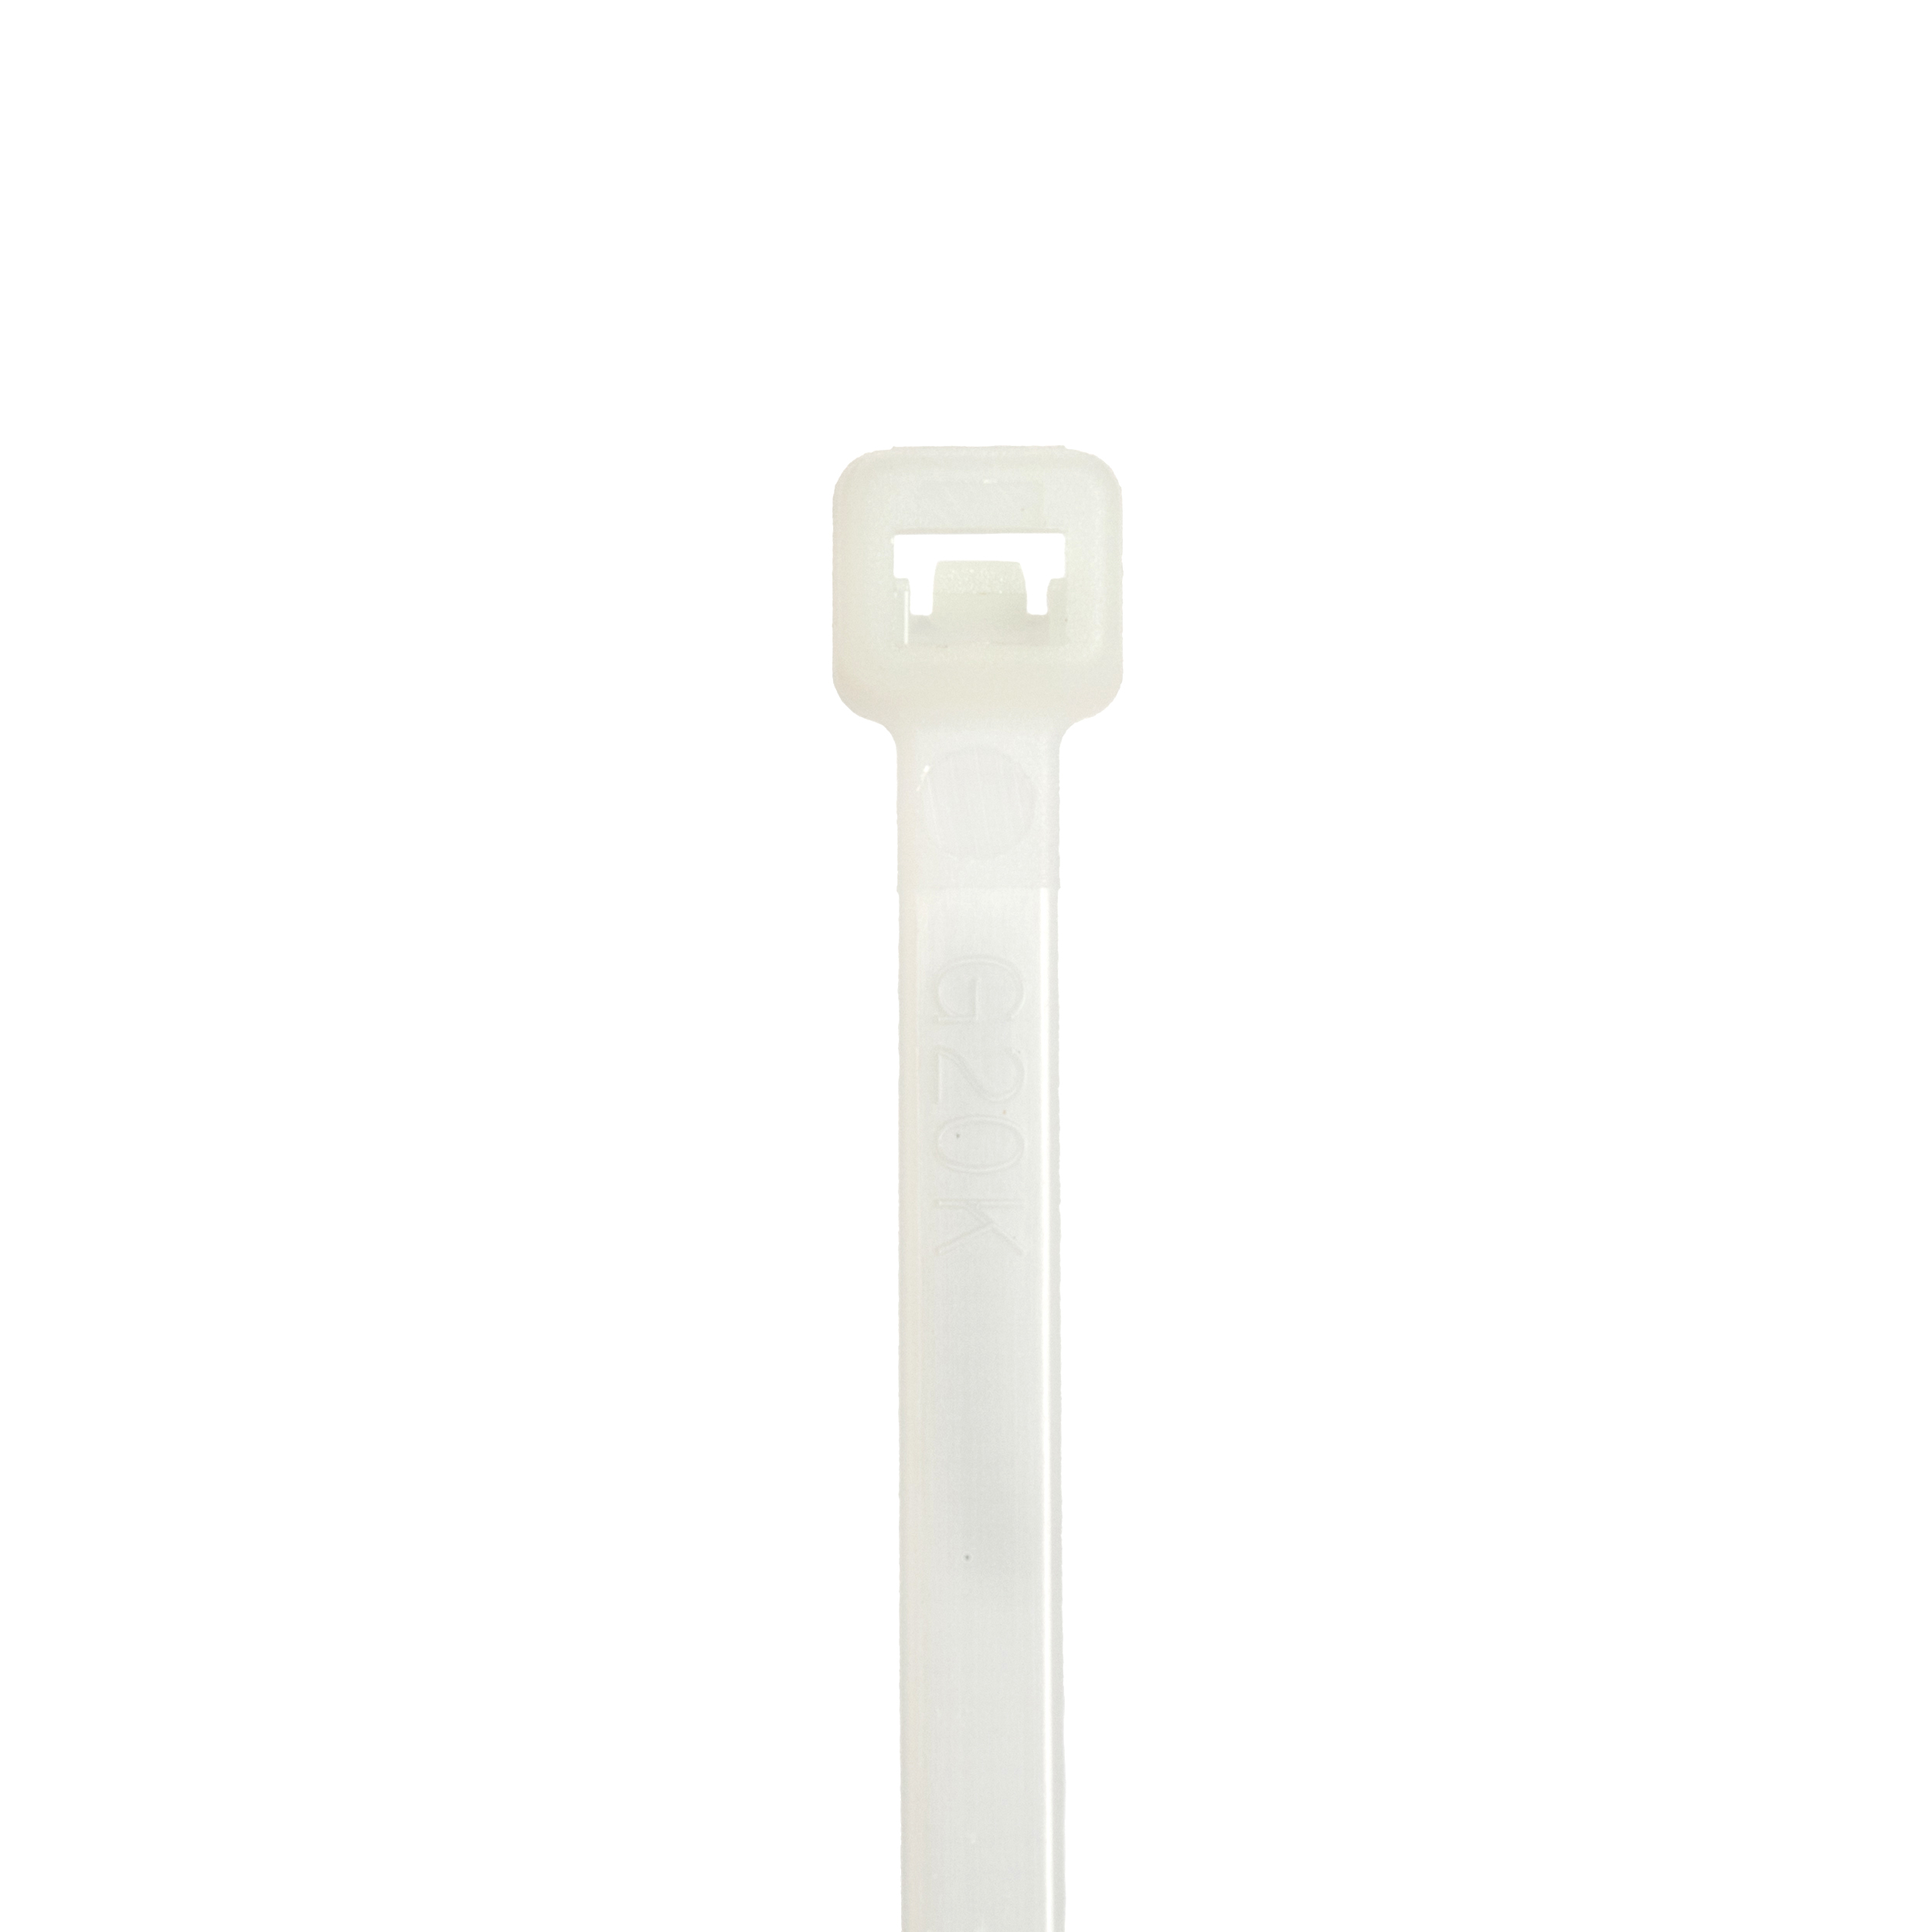 PAN S7-50-M 7.4" CABLE TIE 50TS NATU RAL